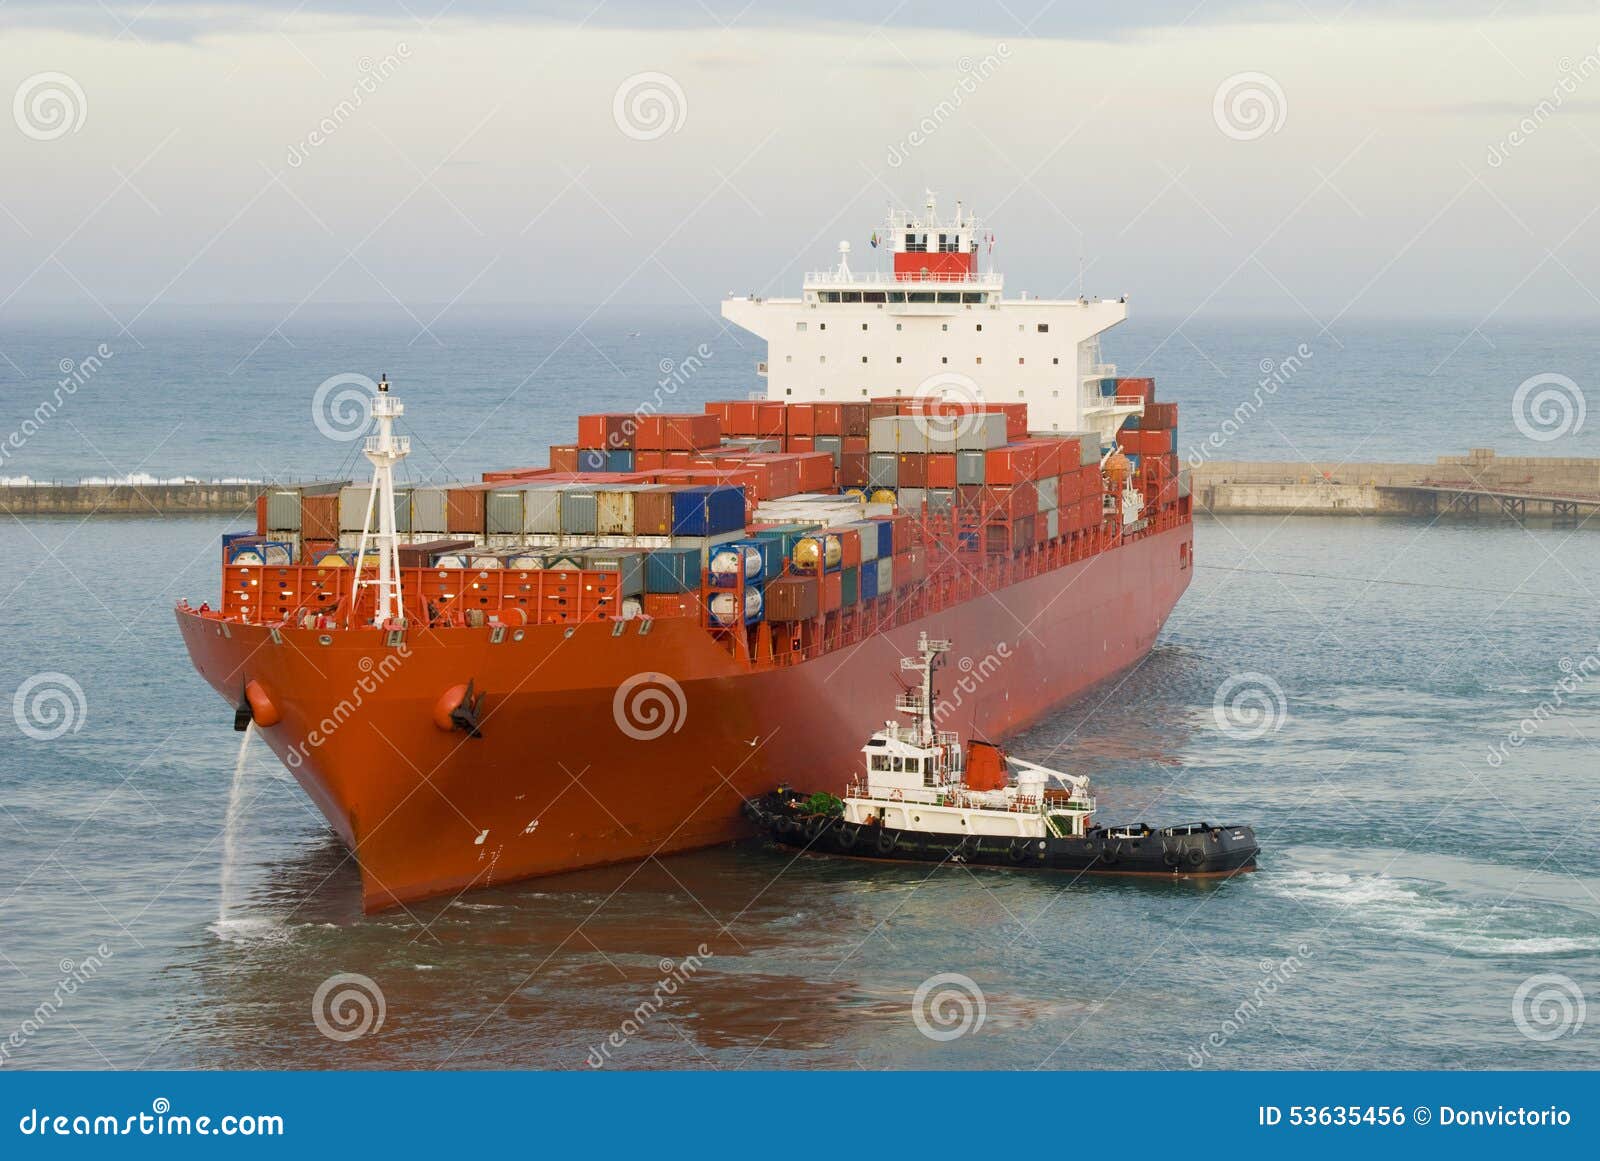 Container Vessel And A Small Tug Boat Stock Photo - Image ...